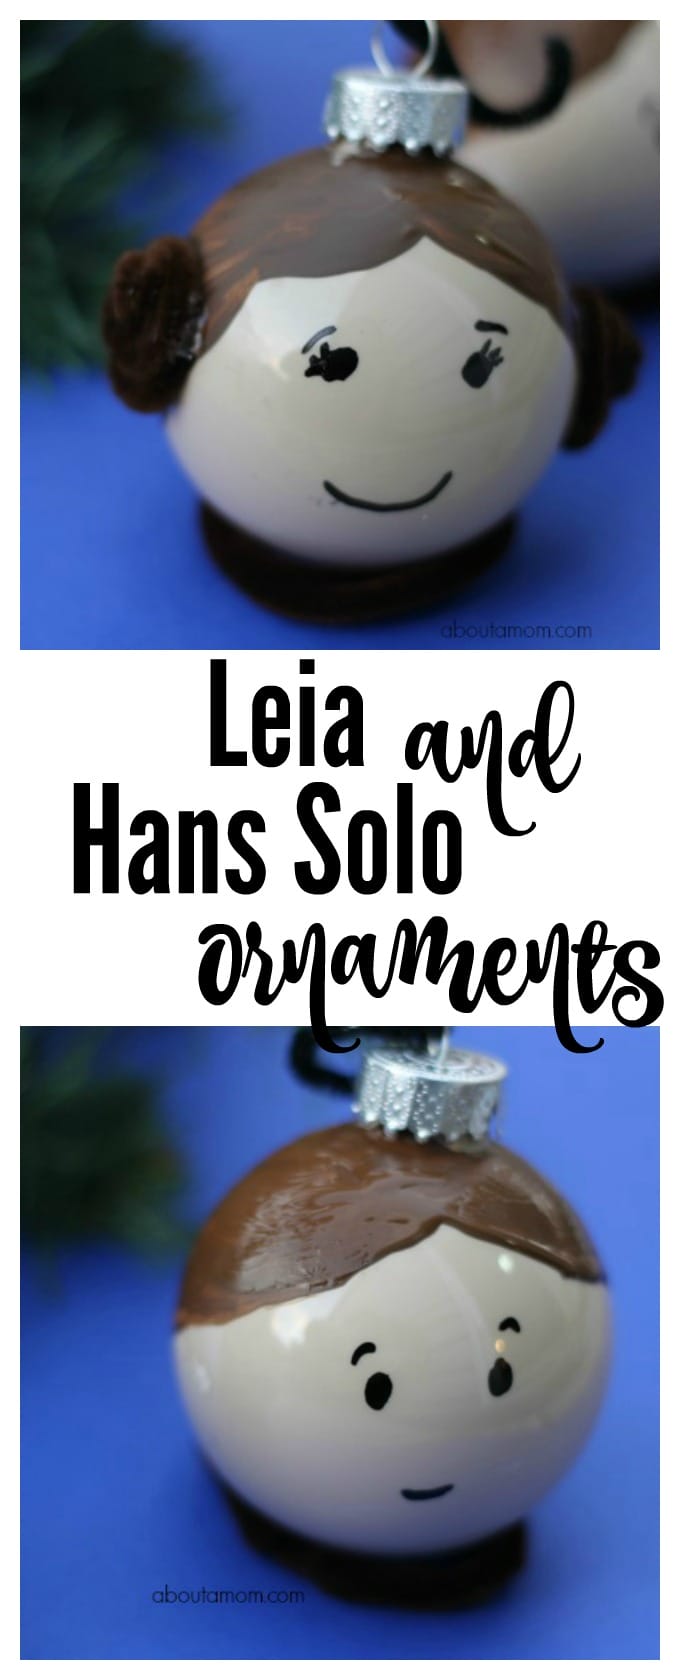 Leia and Hans solo ornaments for the Star Wars geek in you.